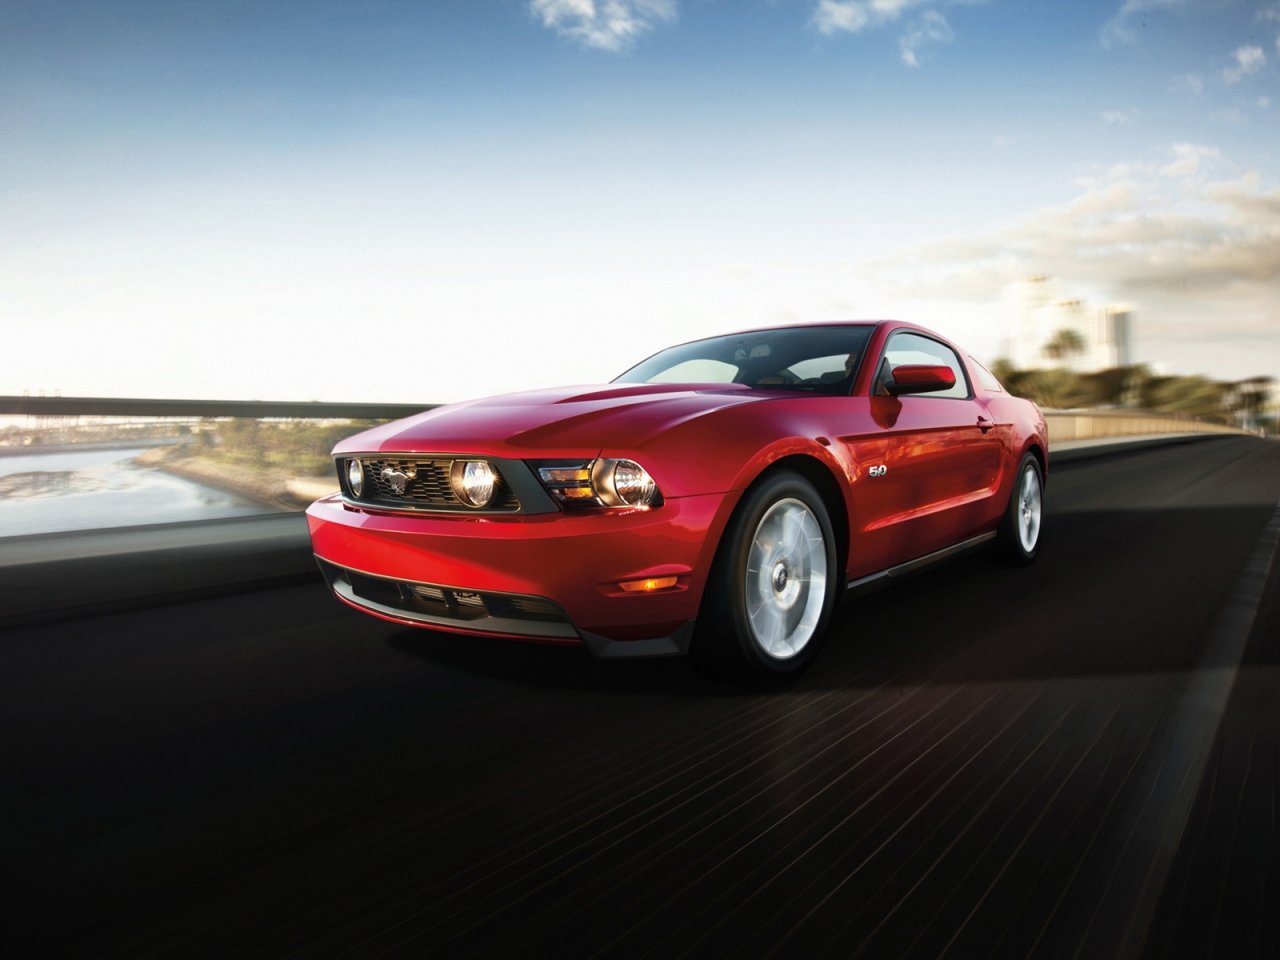 Ford Mustang GT 2012 for 1280 x 960 resolution